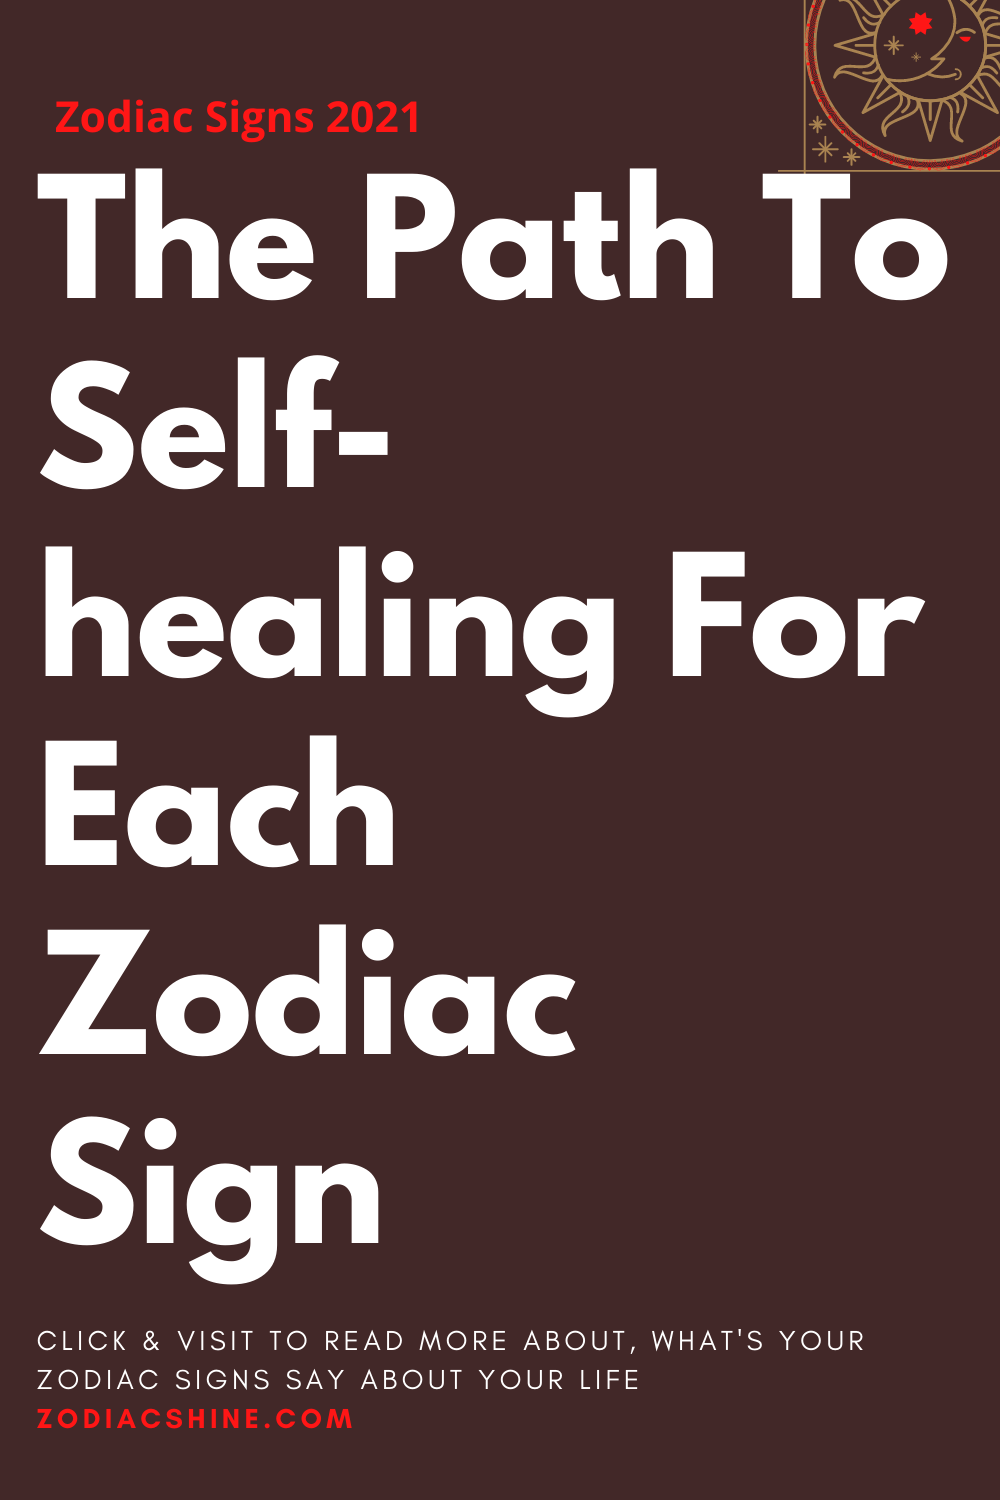 The Path To Self-healing For Each Zodiac Sign